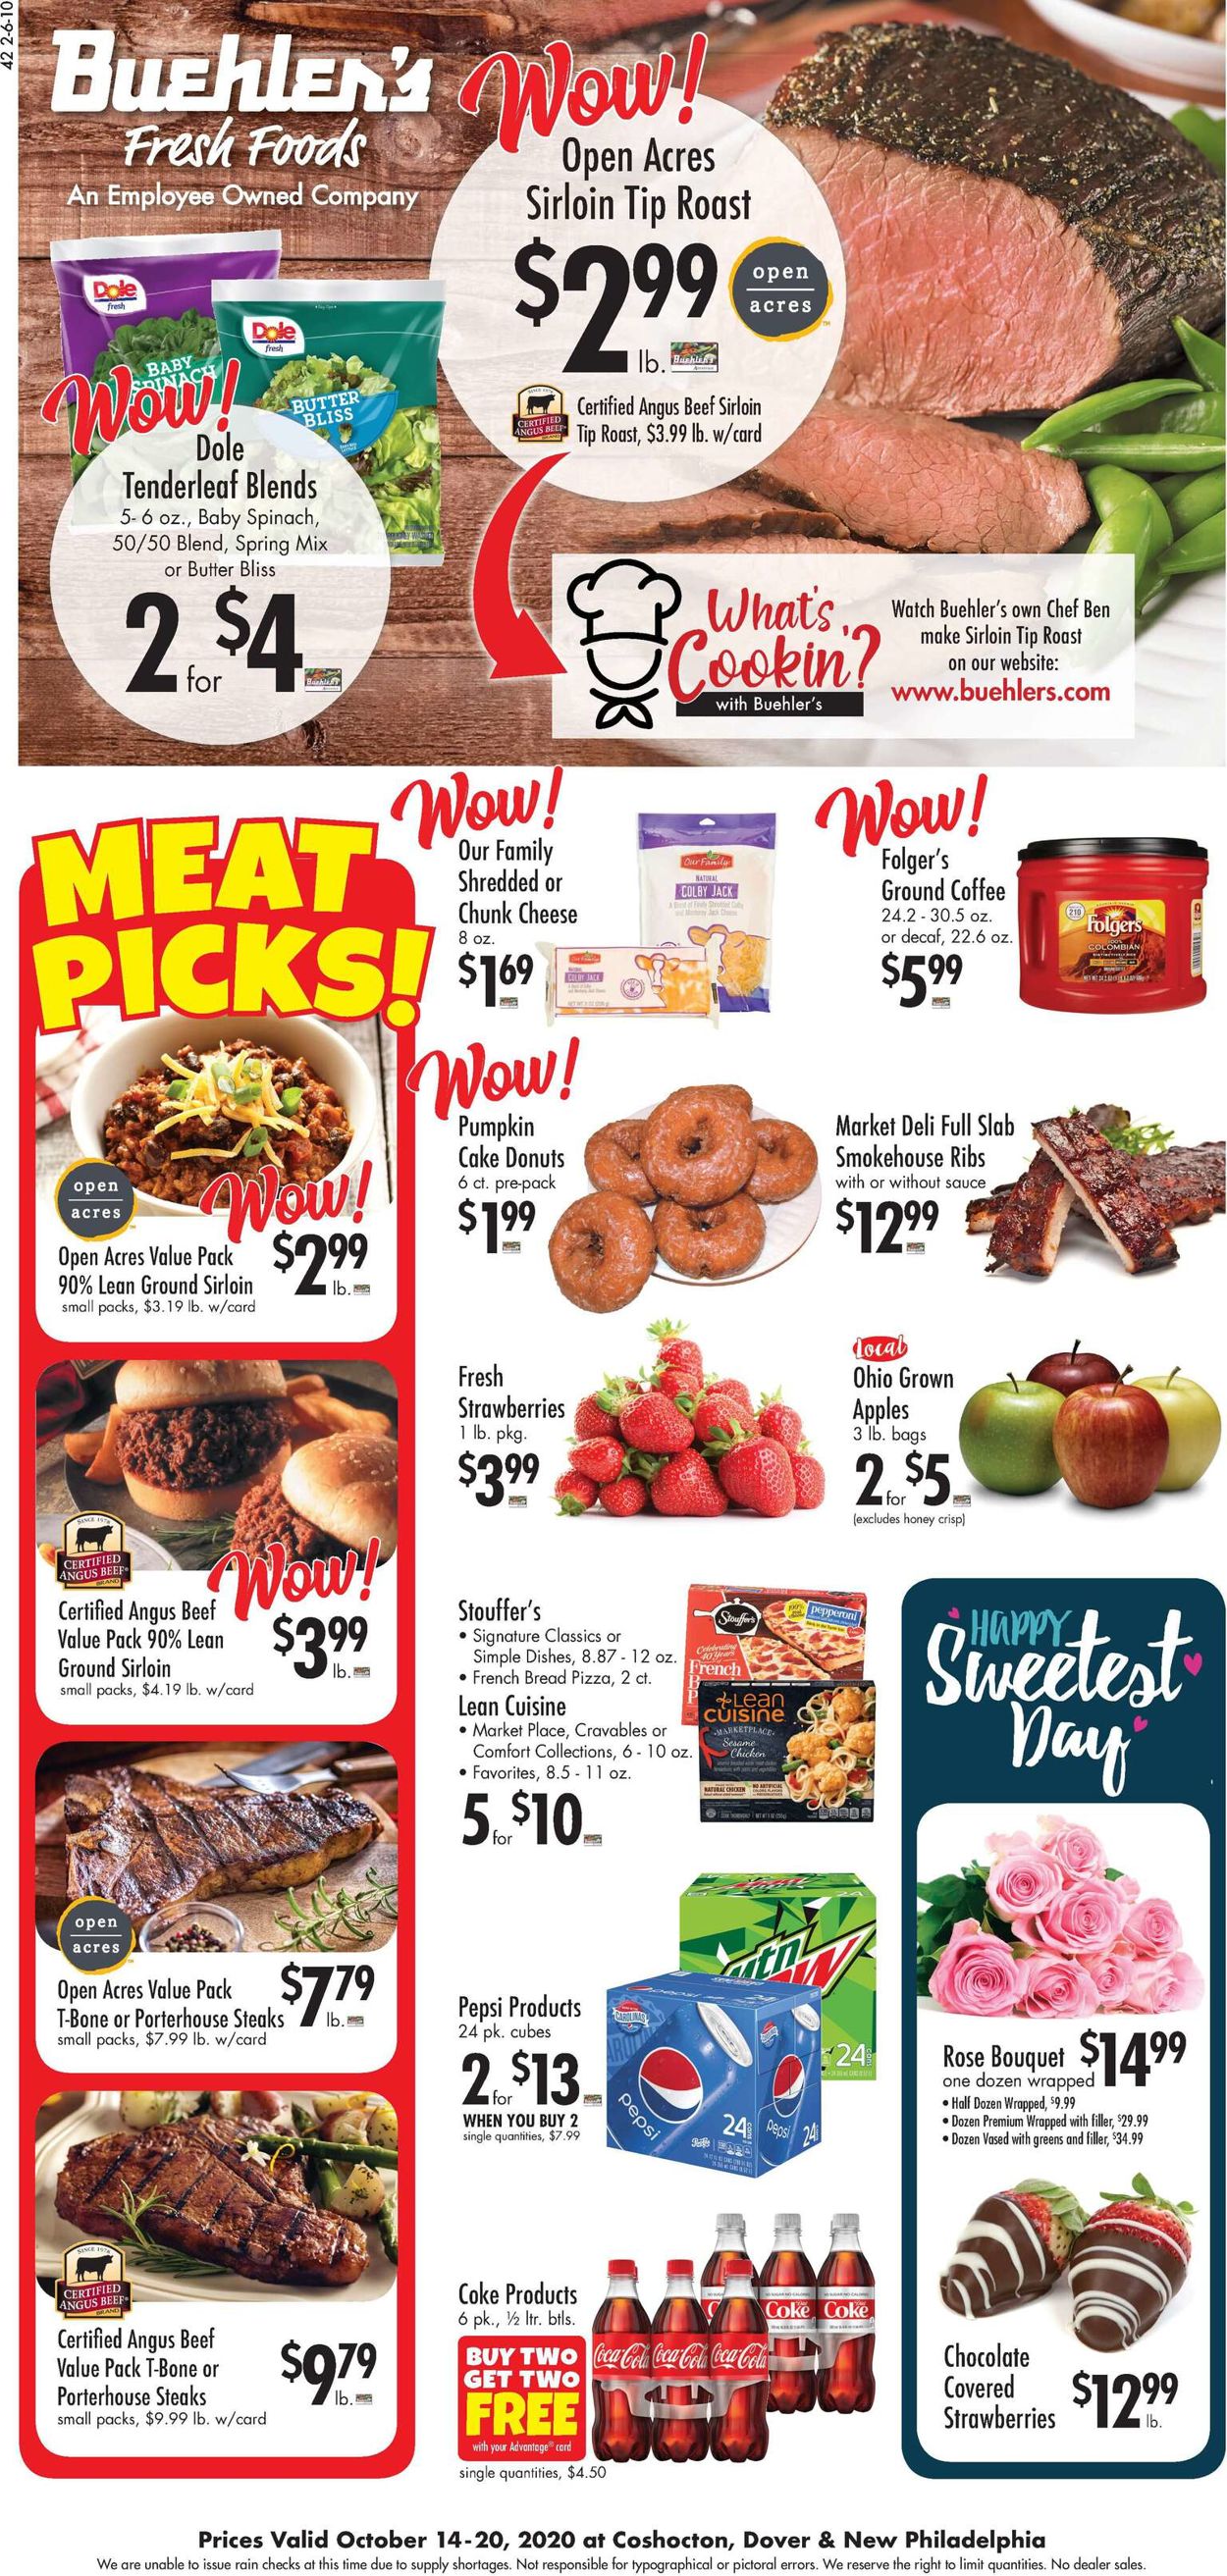 Buehler's Fresh Foods Current weekly ad 10/14 - 10/20/2020 - frequent ...